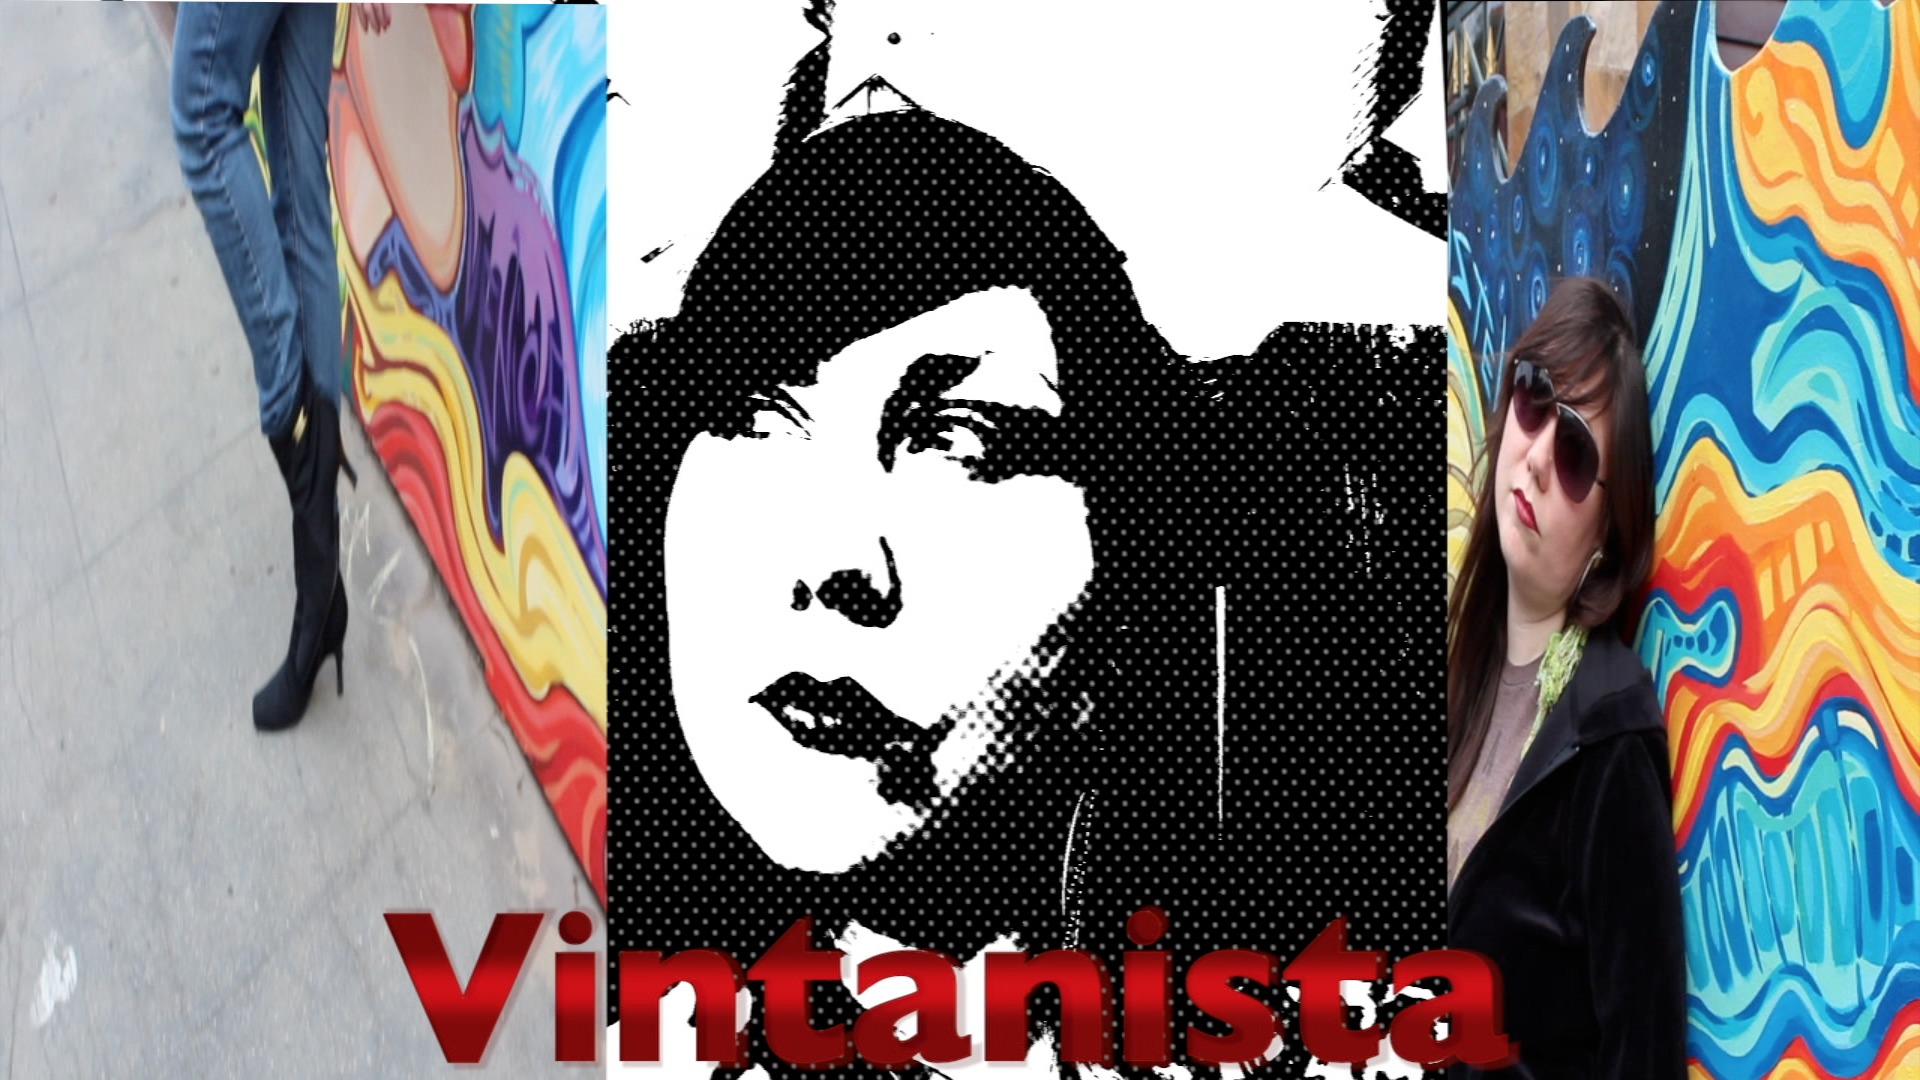 You Might Be A Hipster If...Opening title sequence. Stacia Roybal as Vintanista